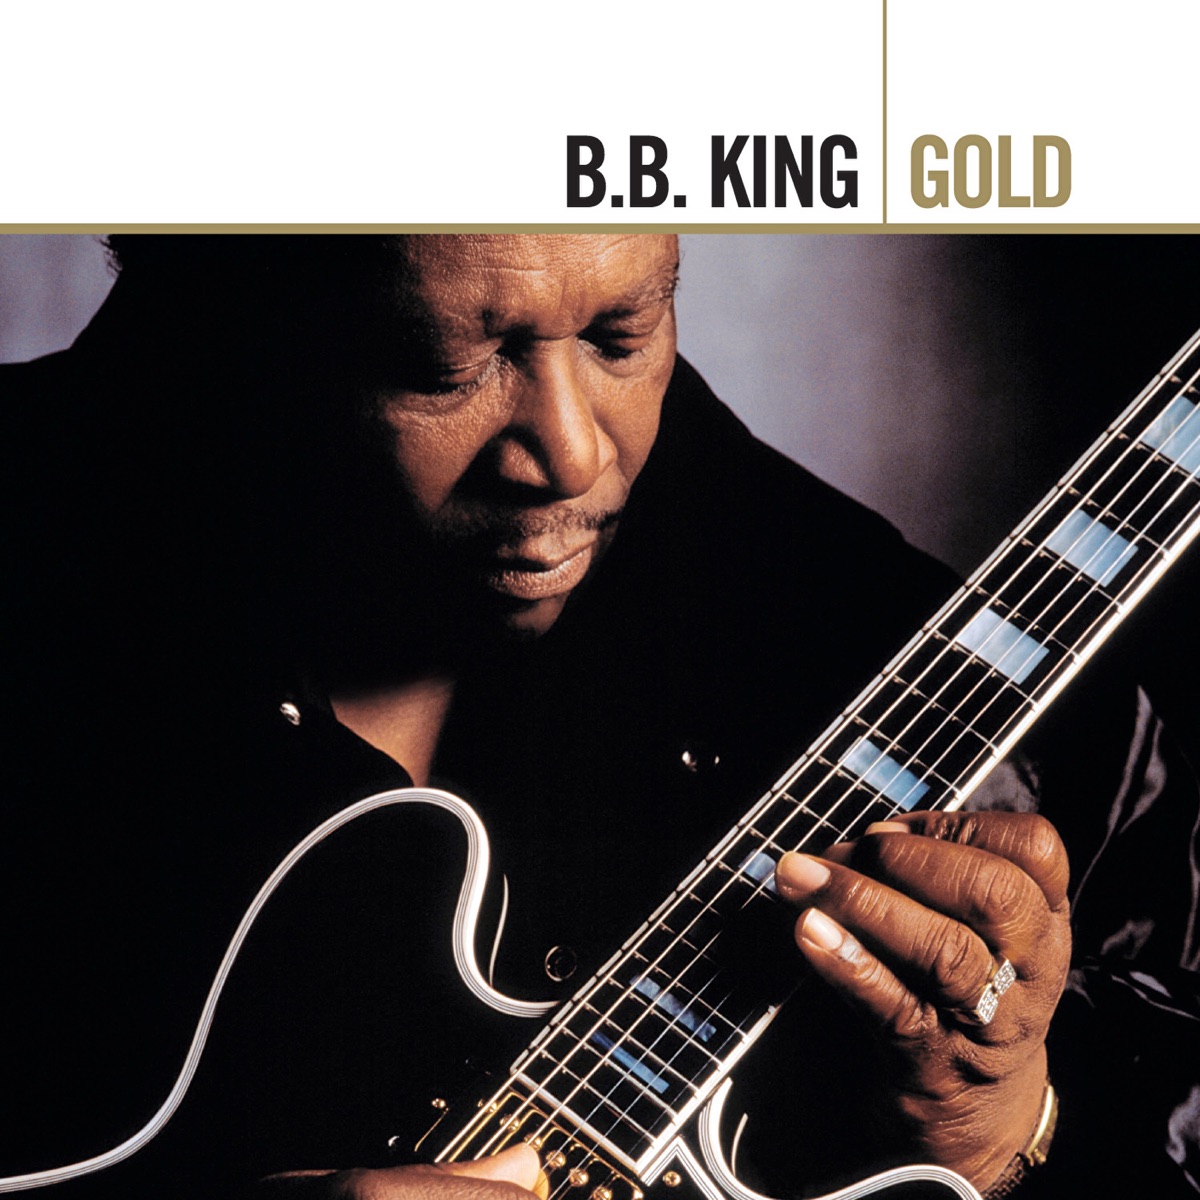 Live At the Regal by B.B. King on Apple Music